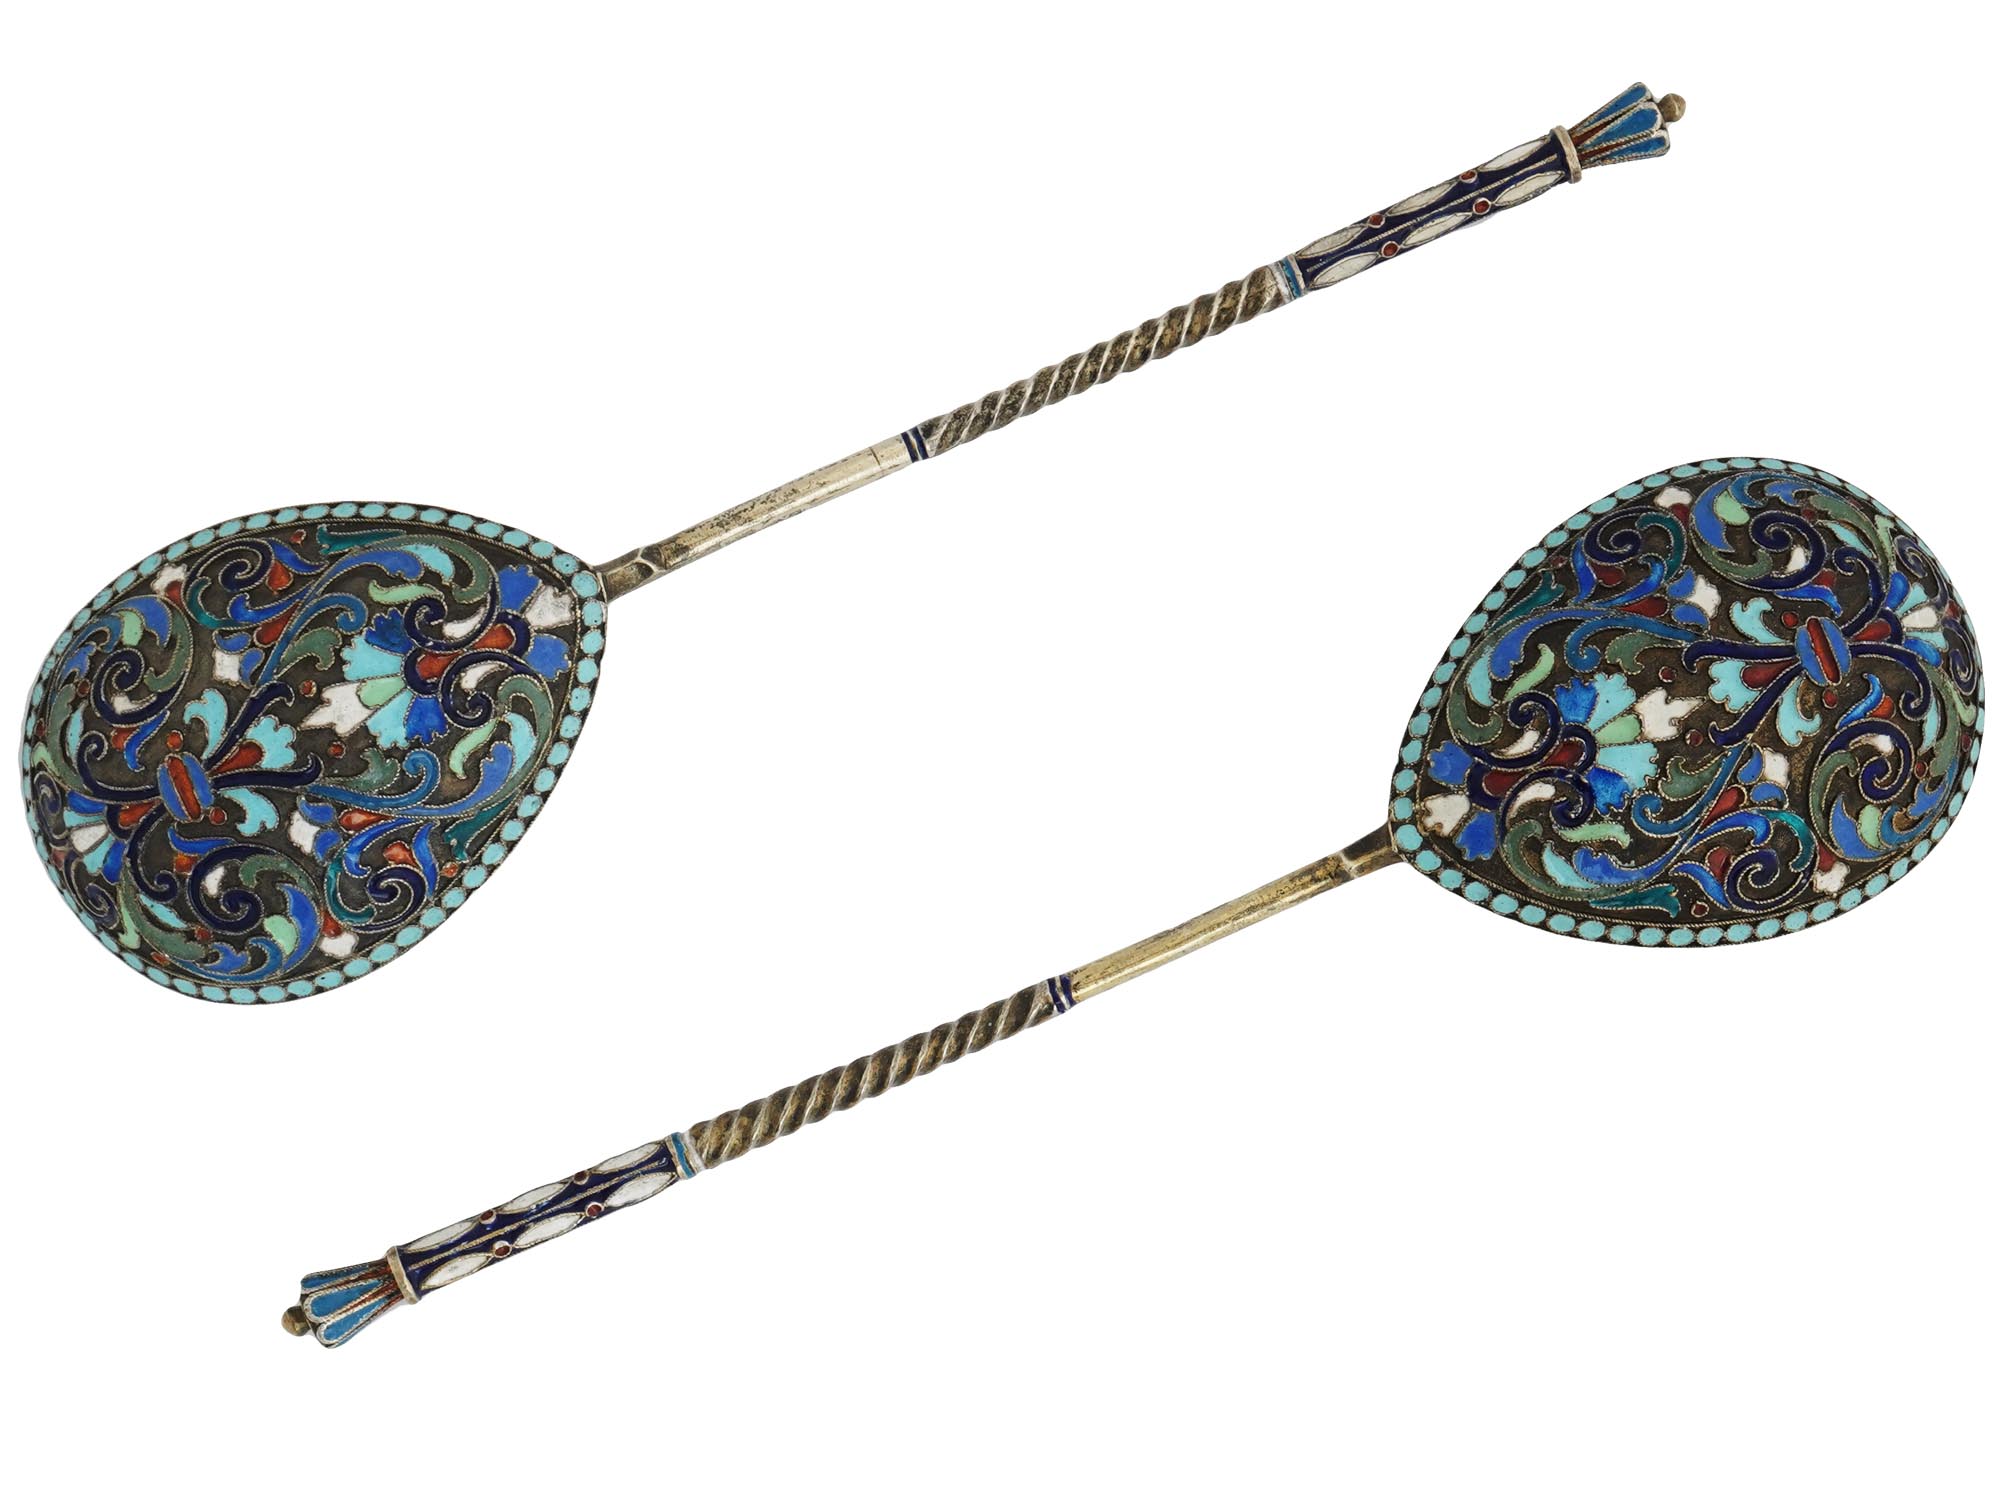 PAIR OF RUSSIAN SILVER AND CLOISONNE ENAMEL SPOON PIC-0